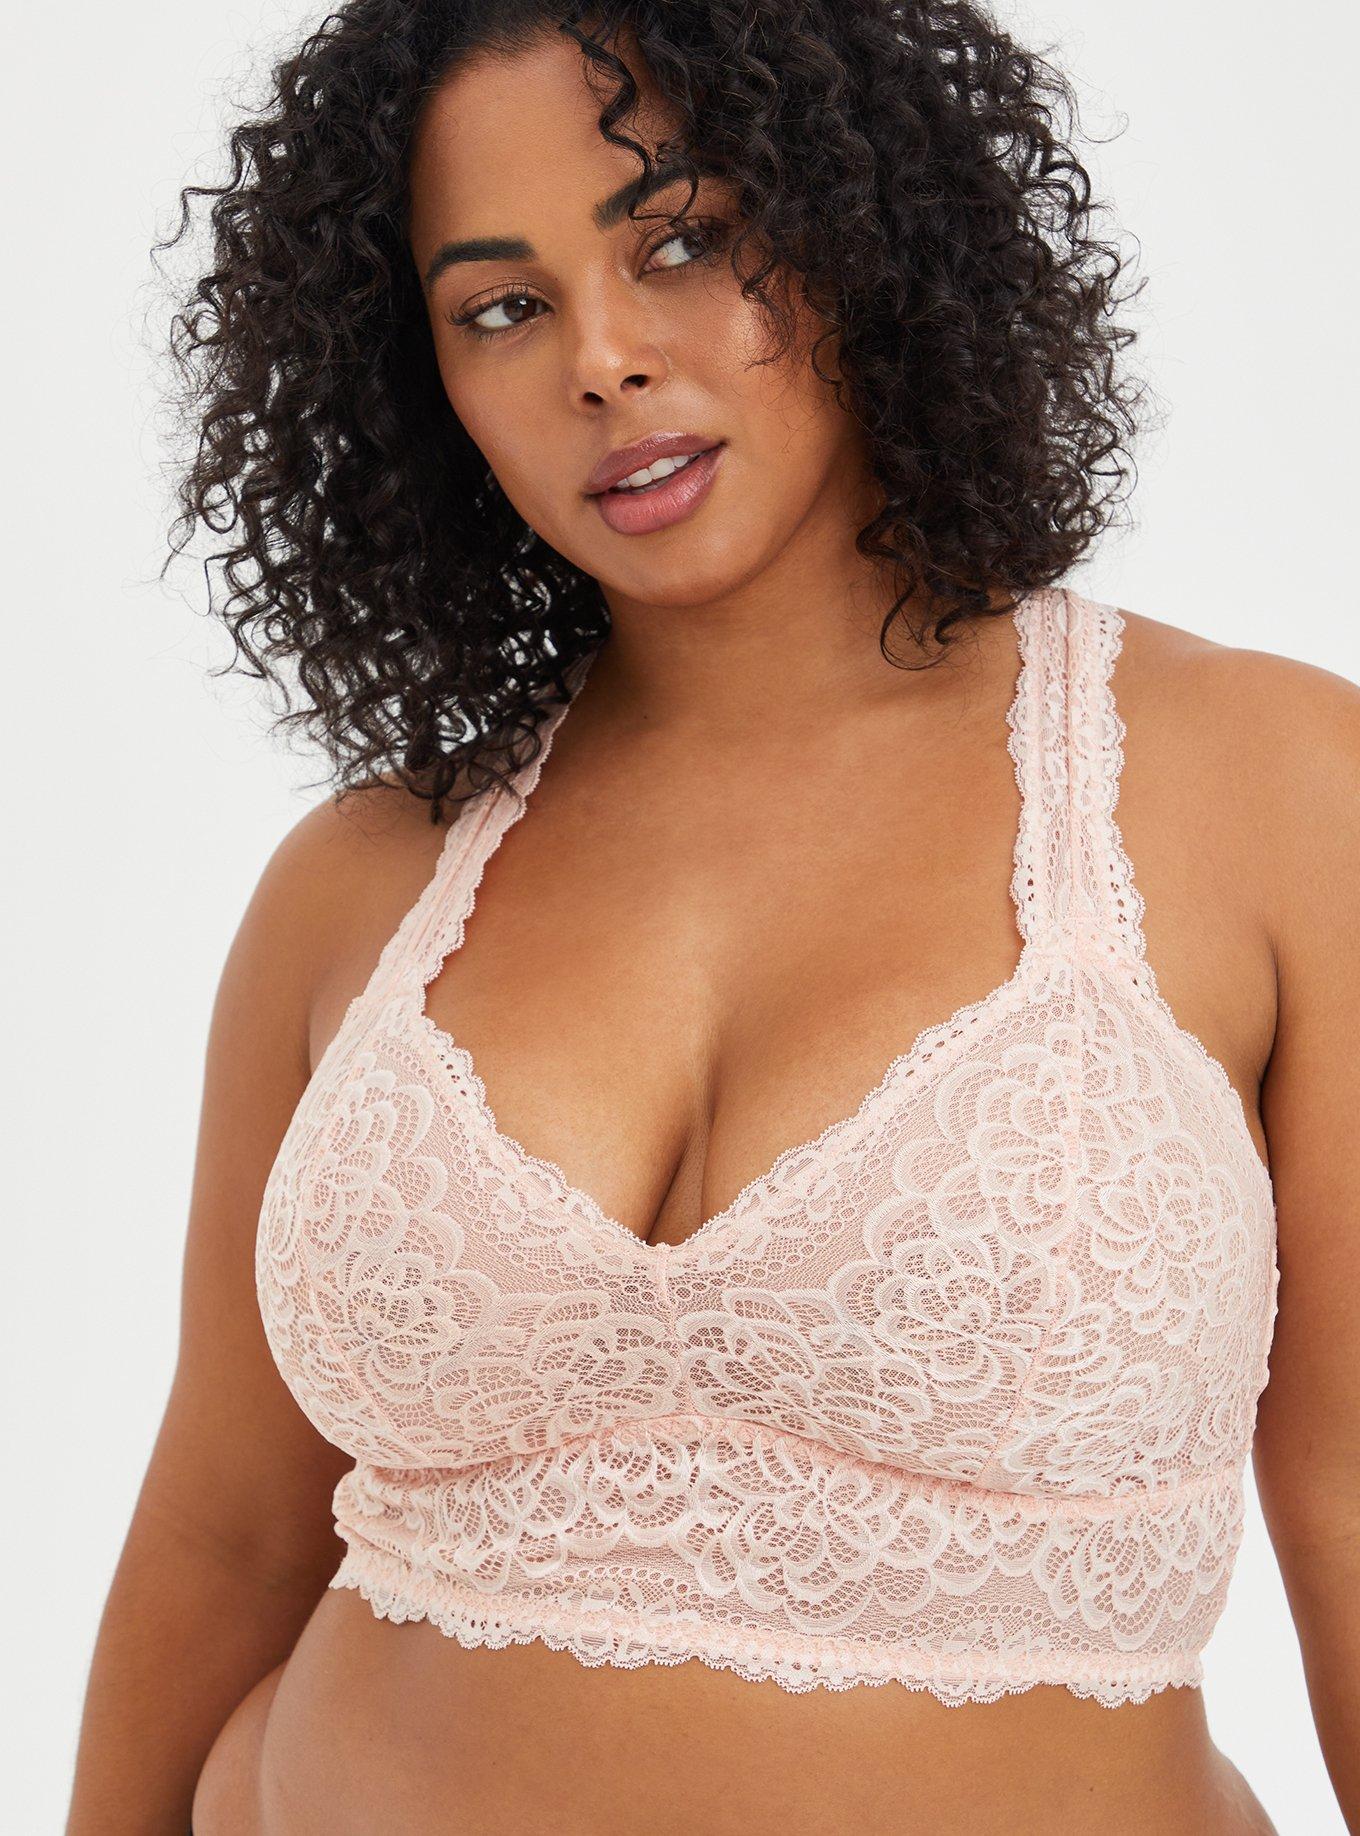 Maurices, Intimates & Sleepwear, Maurices Lace Bralette Large